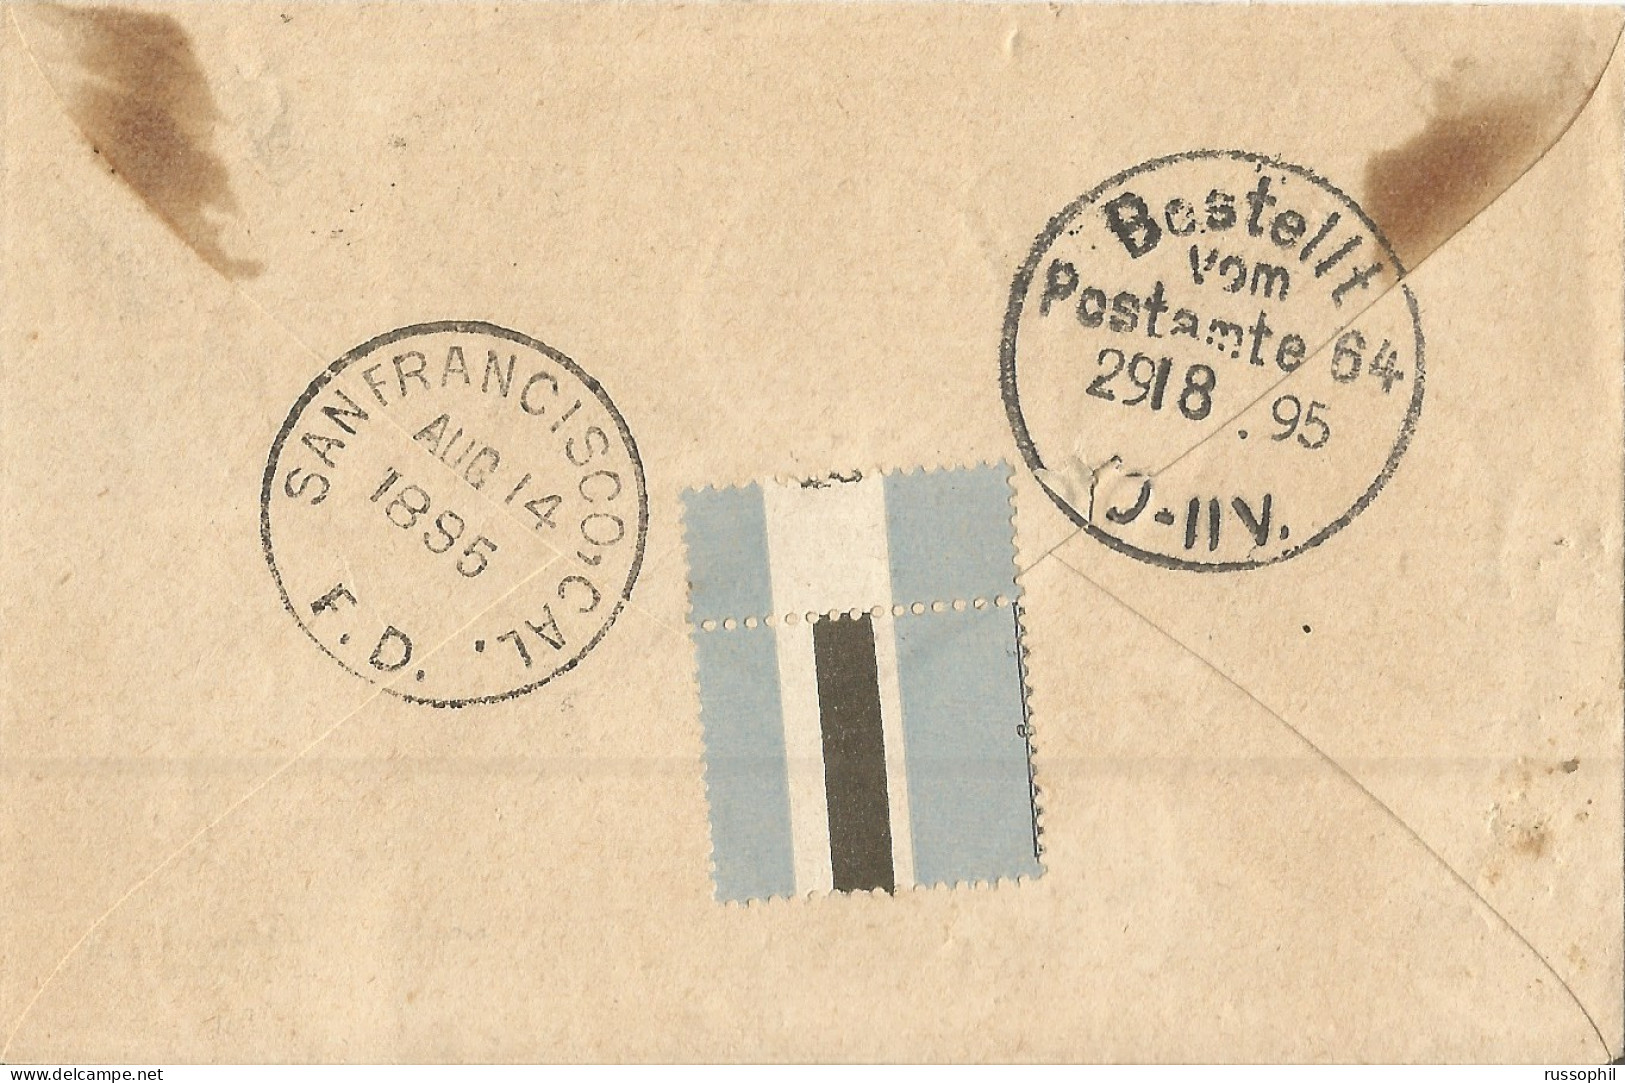 OCEANIE -  5 STAMP 20 CENT. UPRATED 5 CENT. POSTAL STATIONERY COVER FROM PAPEETE TO GERMANY - 1895 - Cartas & Documentos